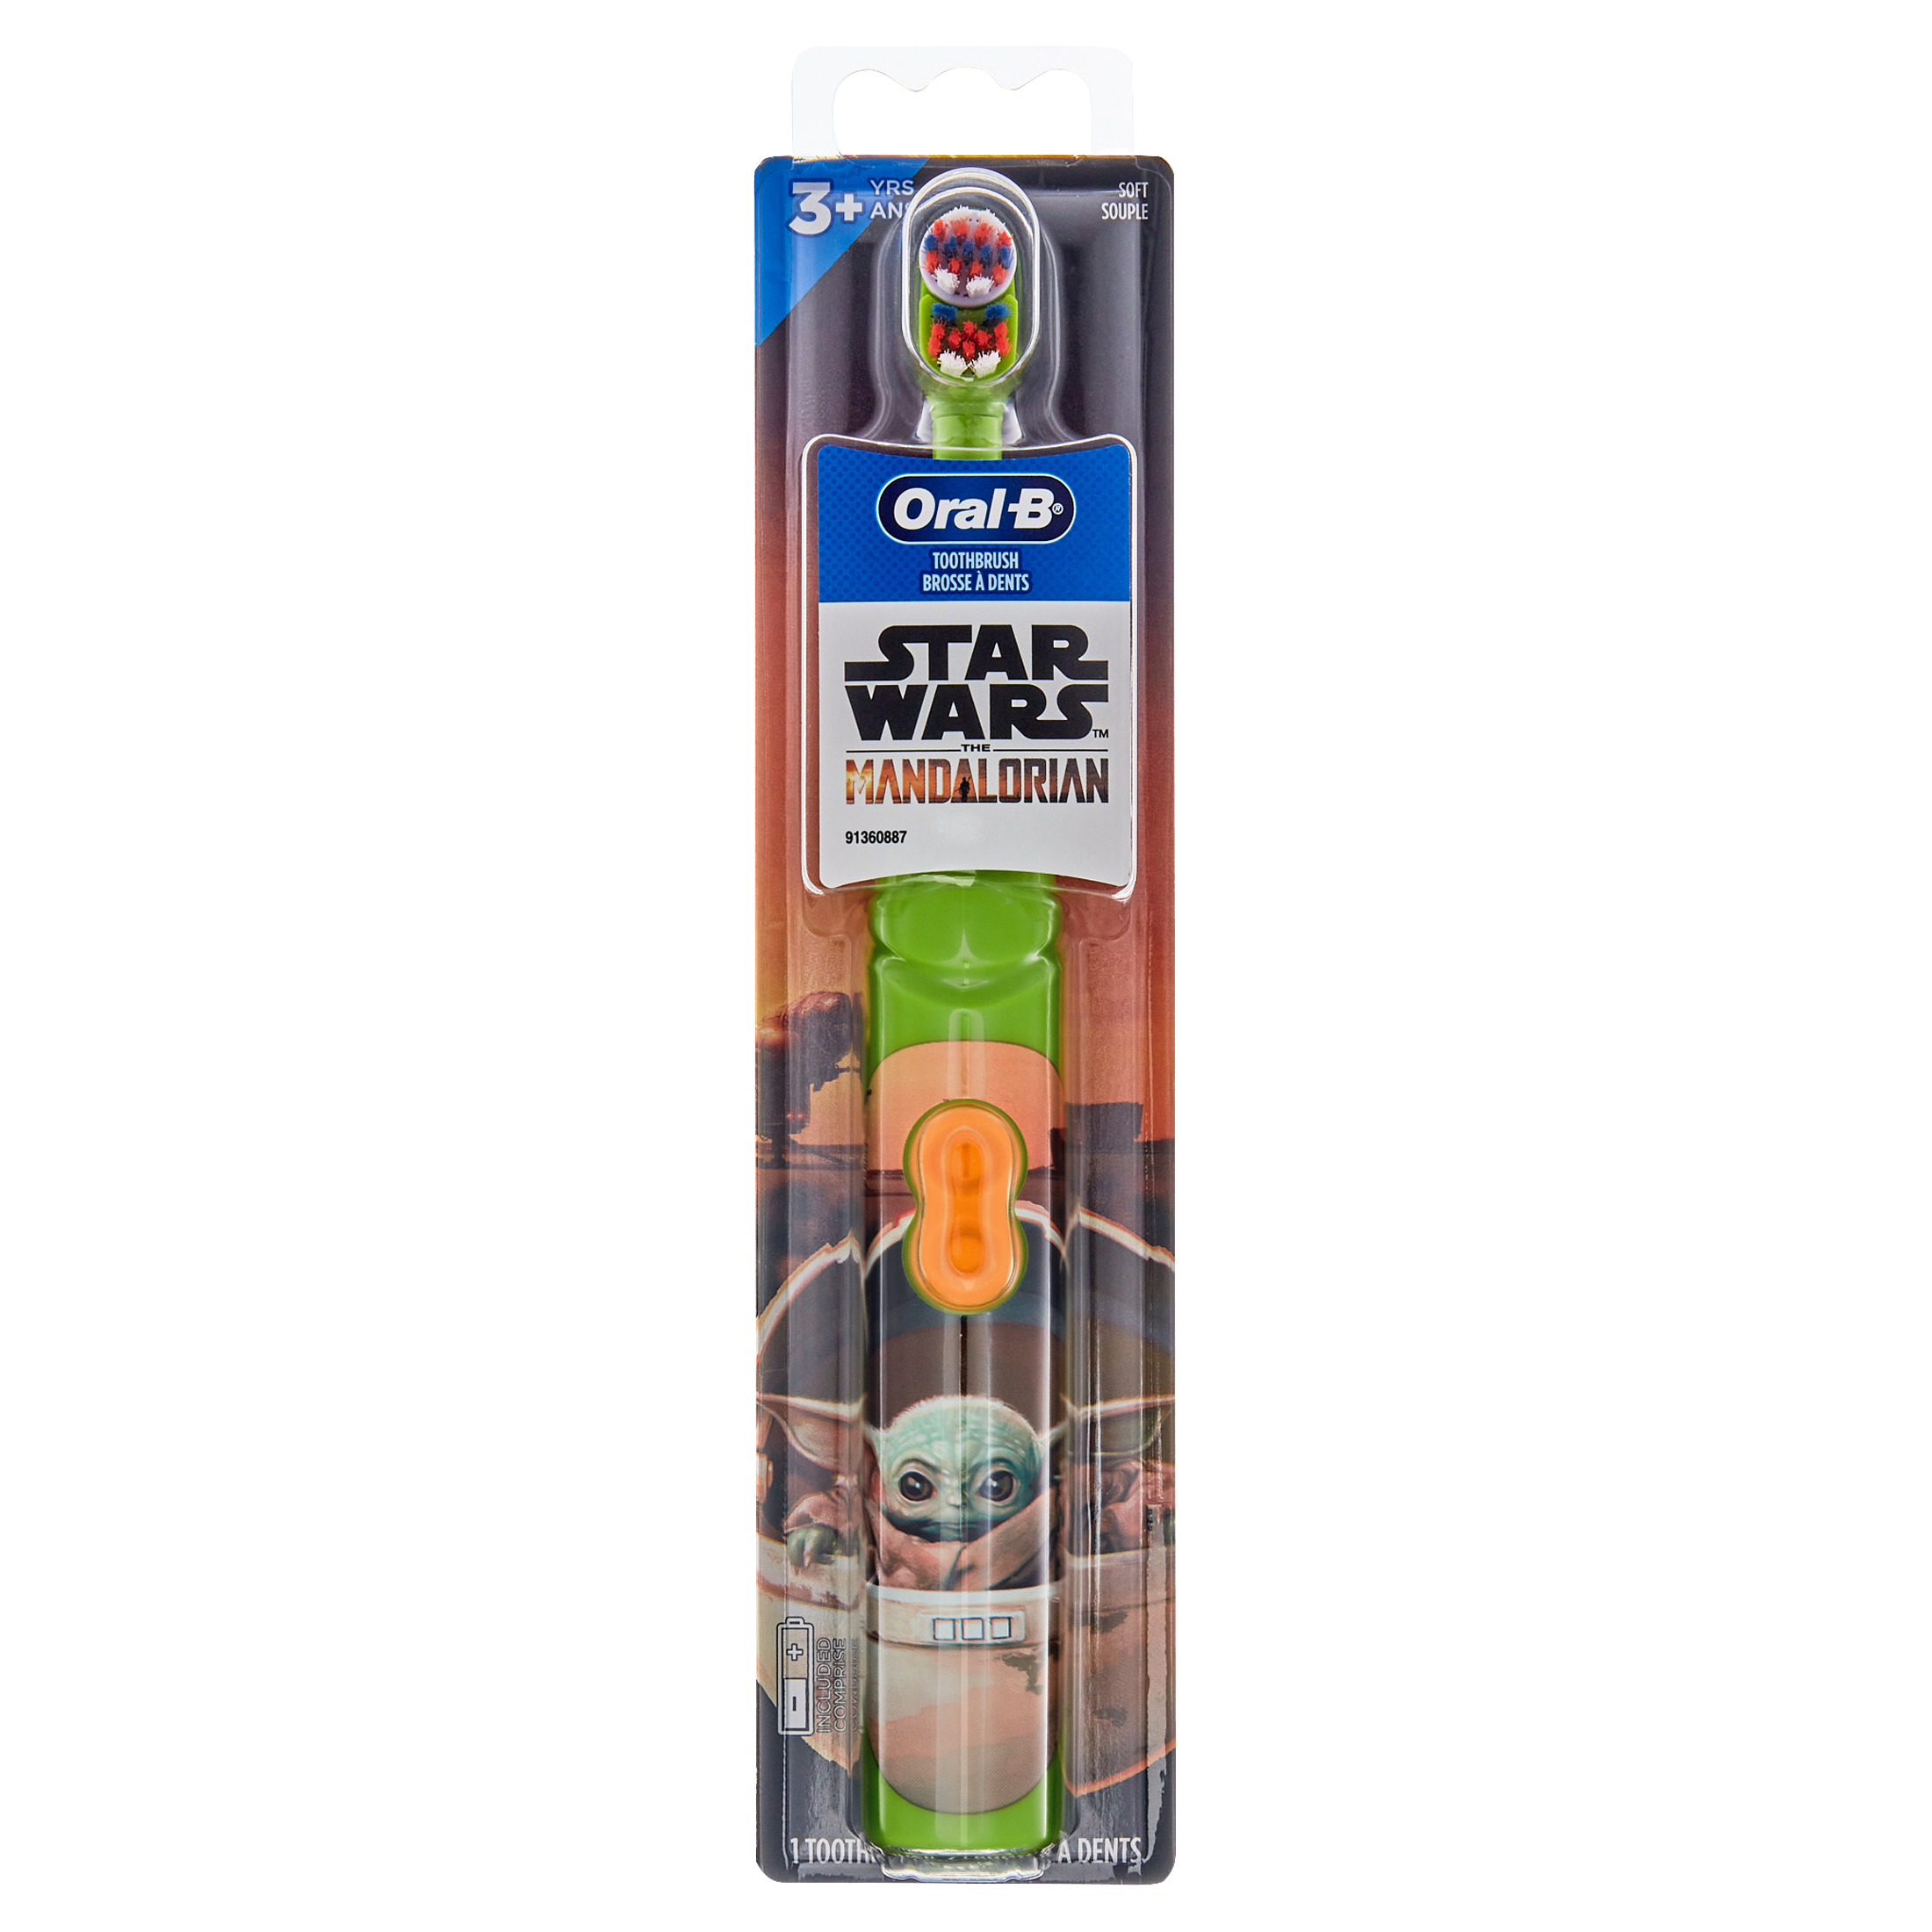 Oral-B Kid's Battery Toothbrush Featuring Lucasfilm's Mandalorian, Full Head, Soft, for Children 3+ - image 1 of 8